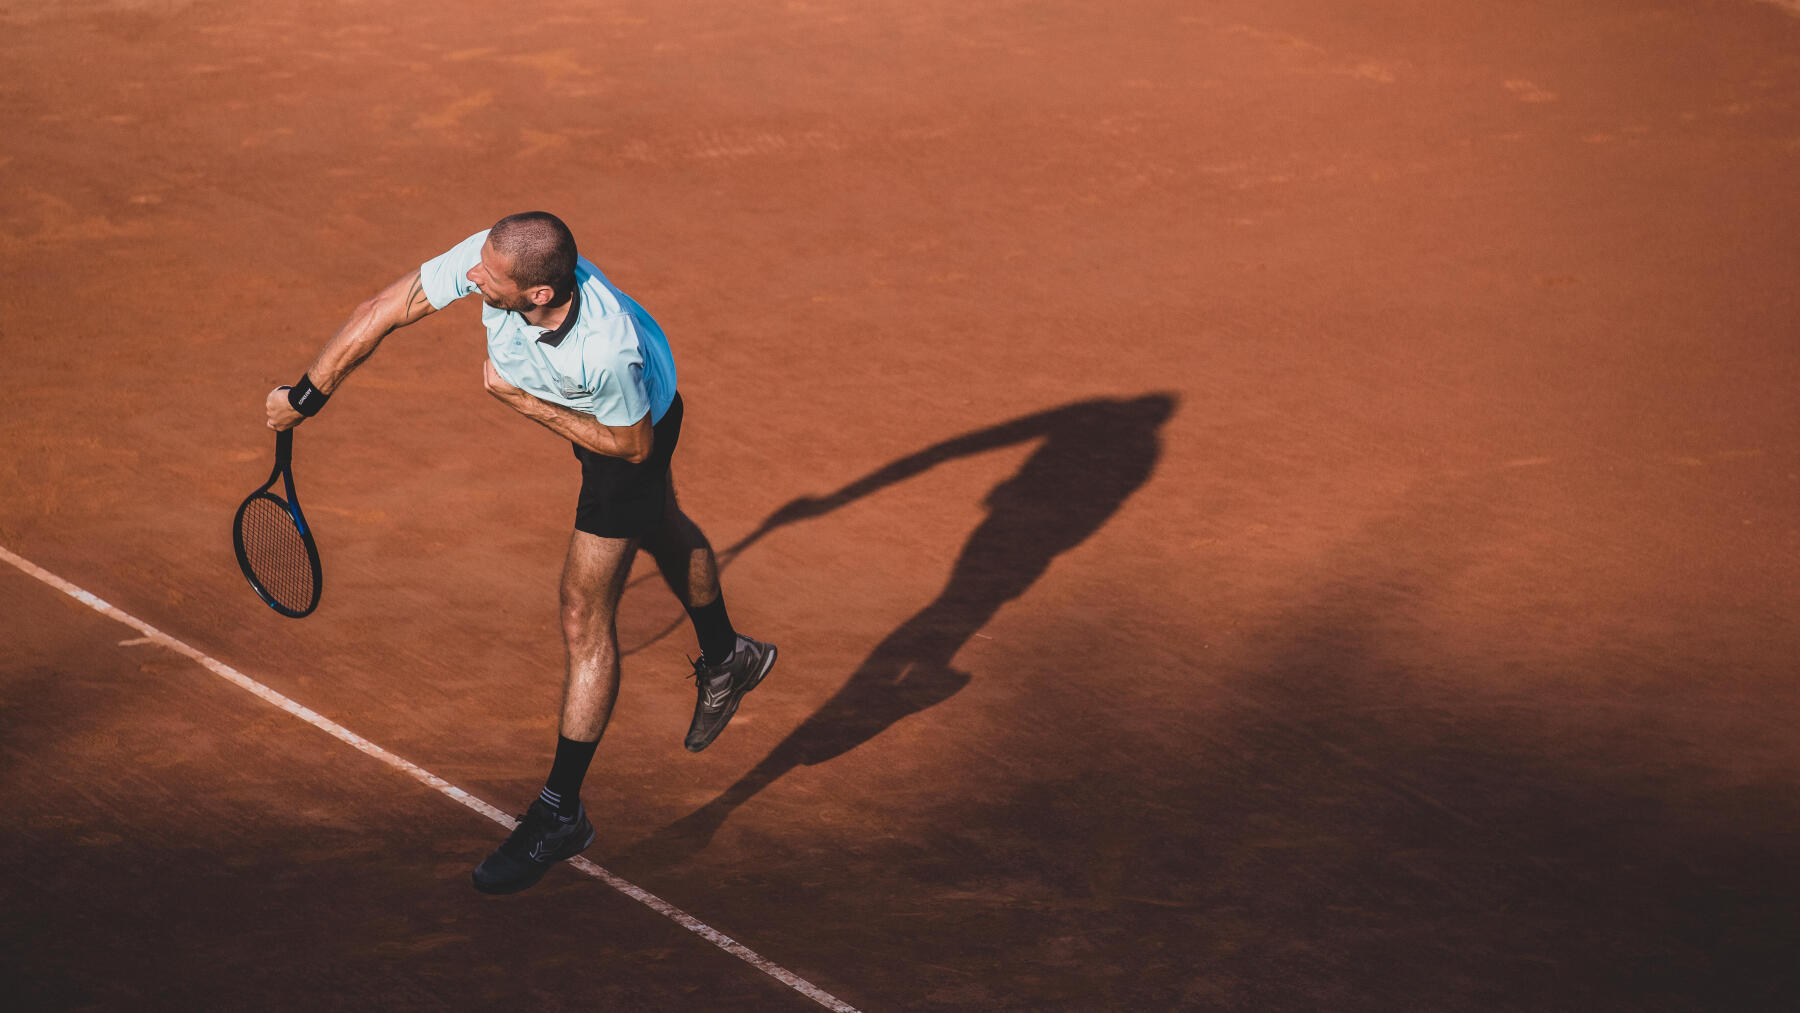 What are the advantages of a clay court?